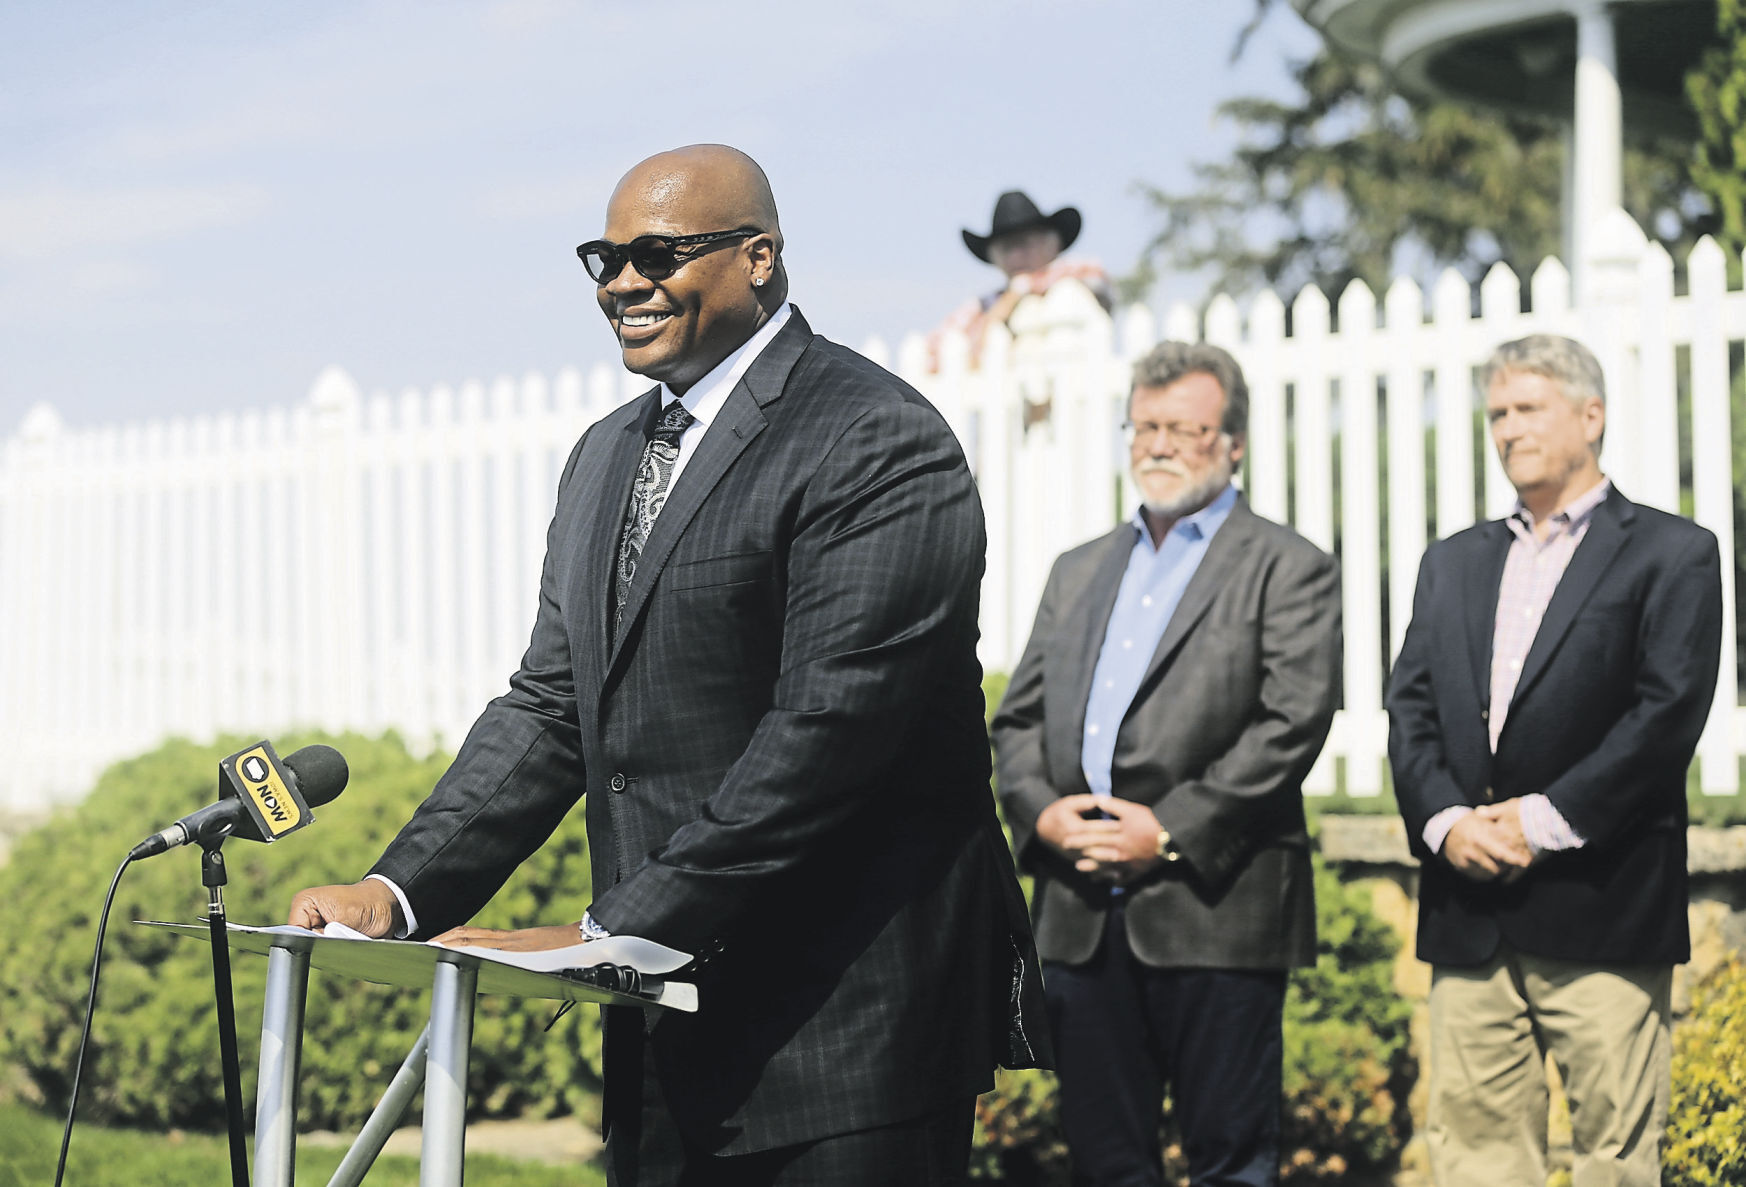 Major League Baseball Hall of Famer Frank Thomas, who will serve as the CEO of This is Heaven, LLC, speaks during a press conference at the Field of Dreams movie site on Thursday in Dyersville, Iowa.    PHOTO CREDIT: JESSICA REILLY